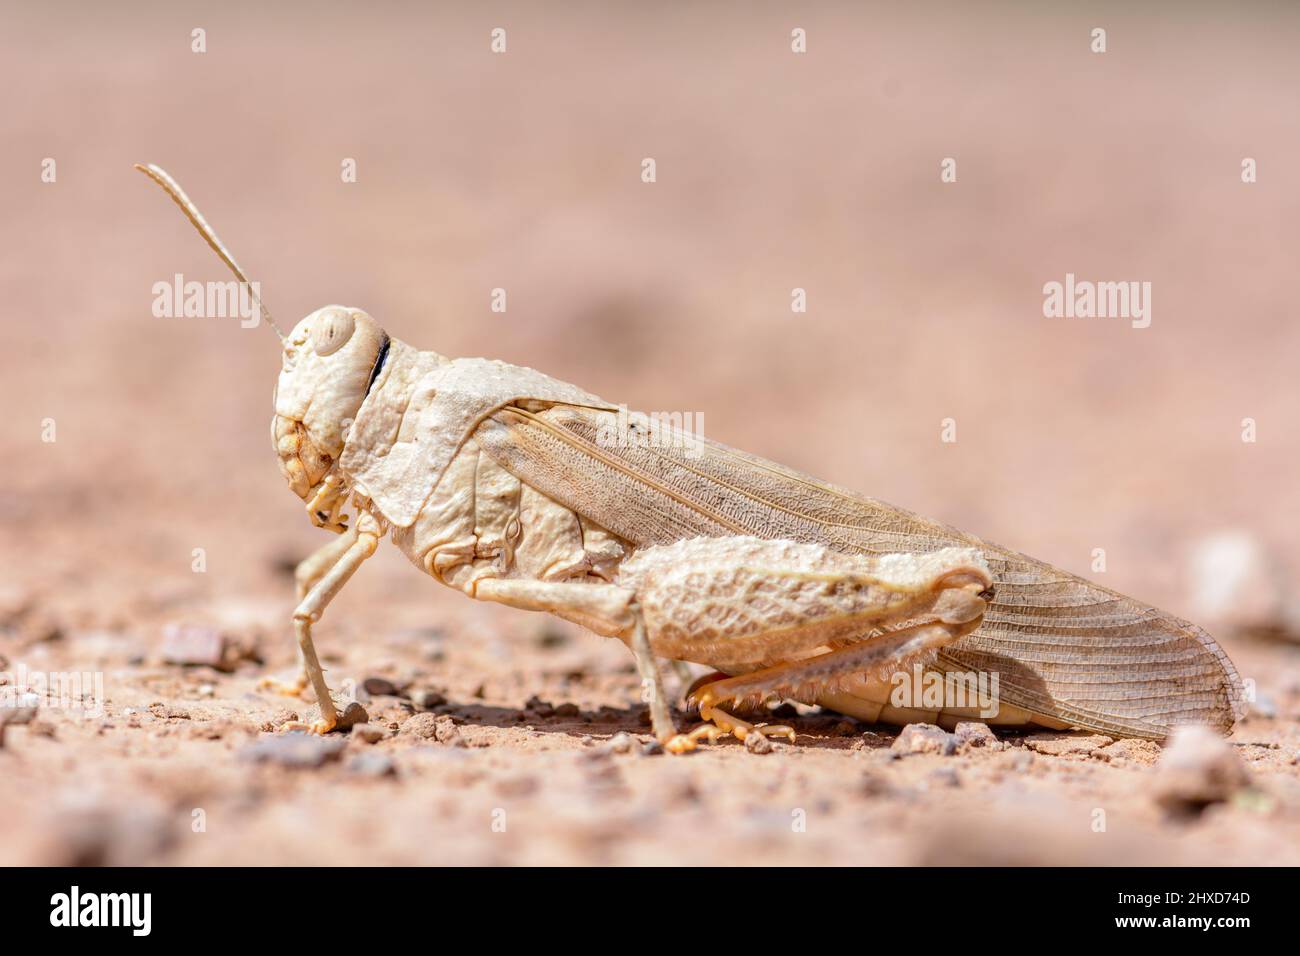 Migratory locust camouflaged in the stone desert in Morocco. Springtime. Stock Photo